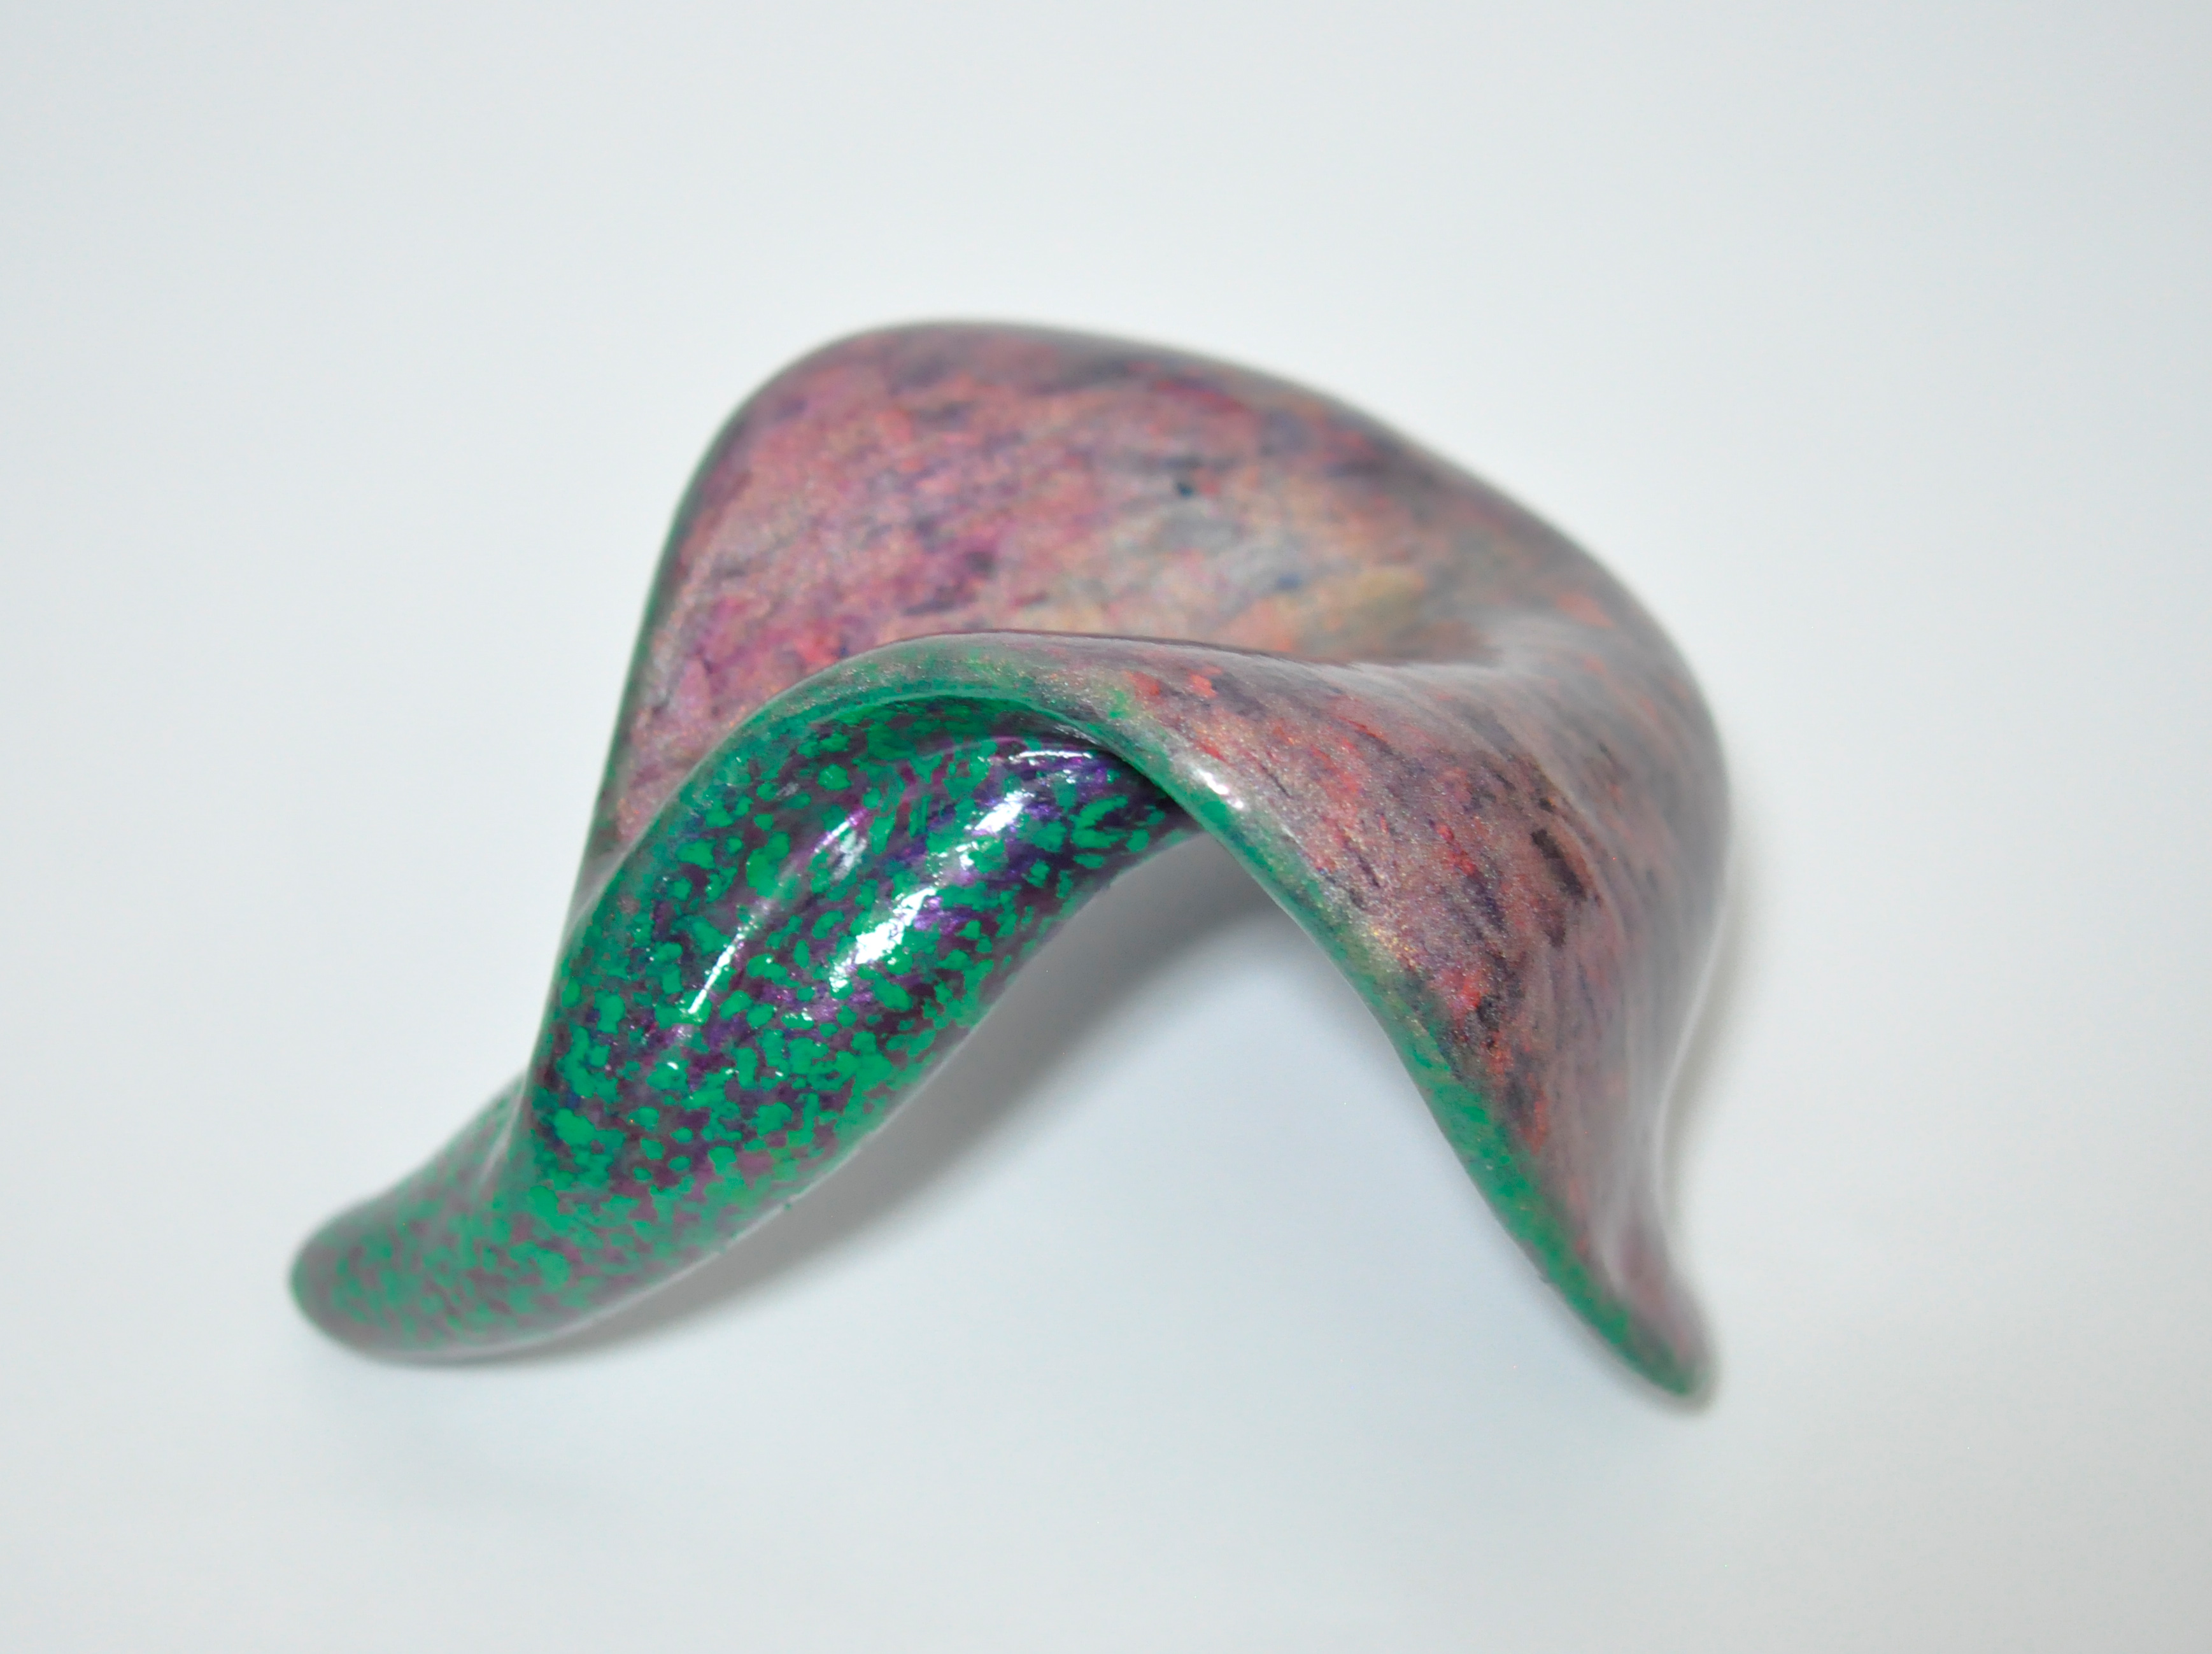 A Touch, 2012, Oil, Nail Polish, and Varnish on Clay, 3.1 x 5.5 x 4.7 in. / 8 x 14 x 12 cm [#SS12SC019]